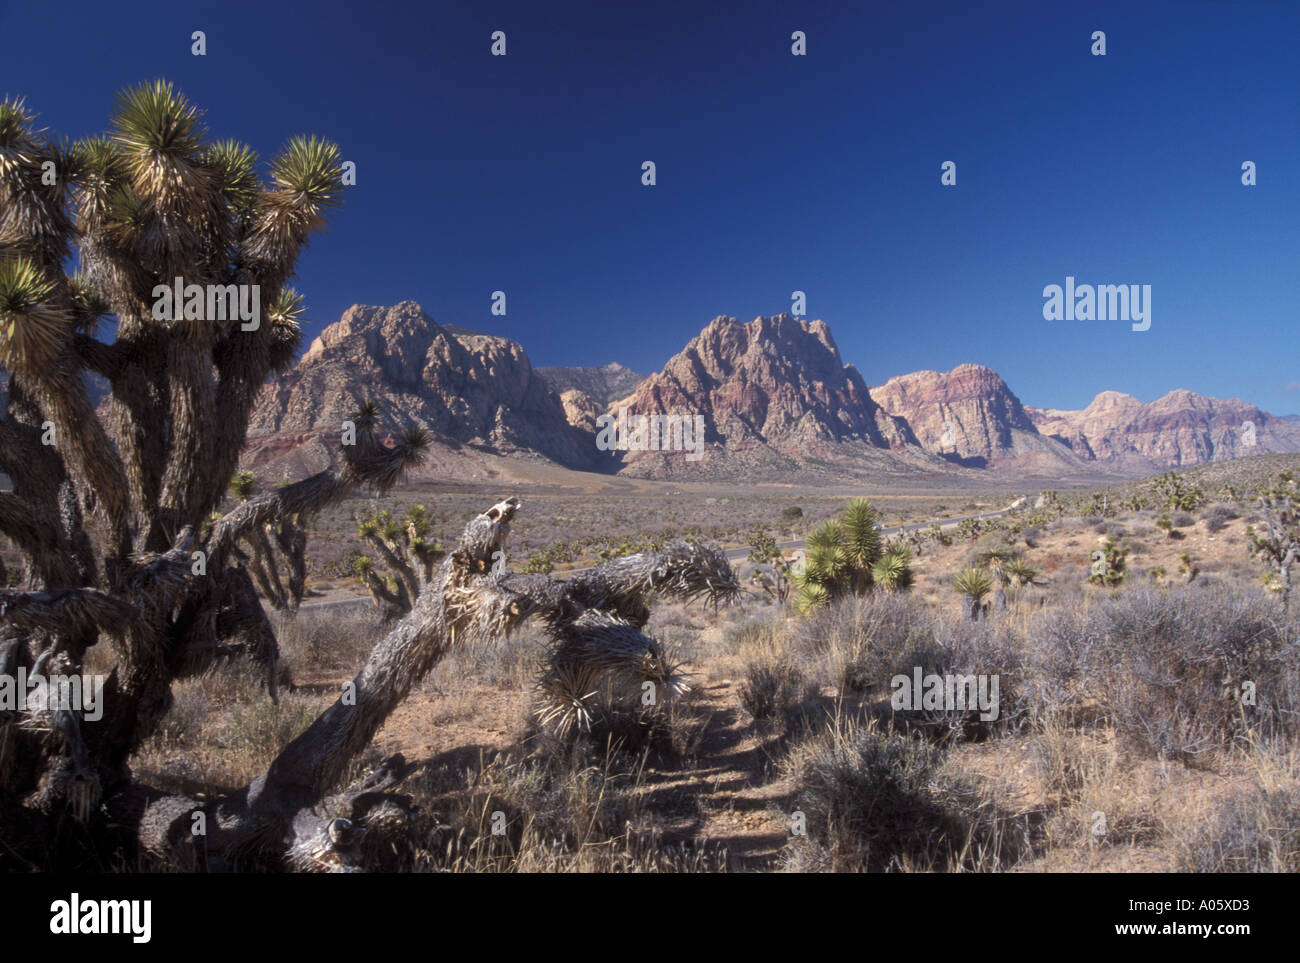 Red Rock Conservation area with Joshua or Yucca trees Yucca brevifolia near Las Vegas Nevada USA Stock Photo